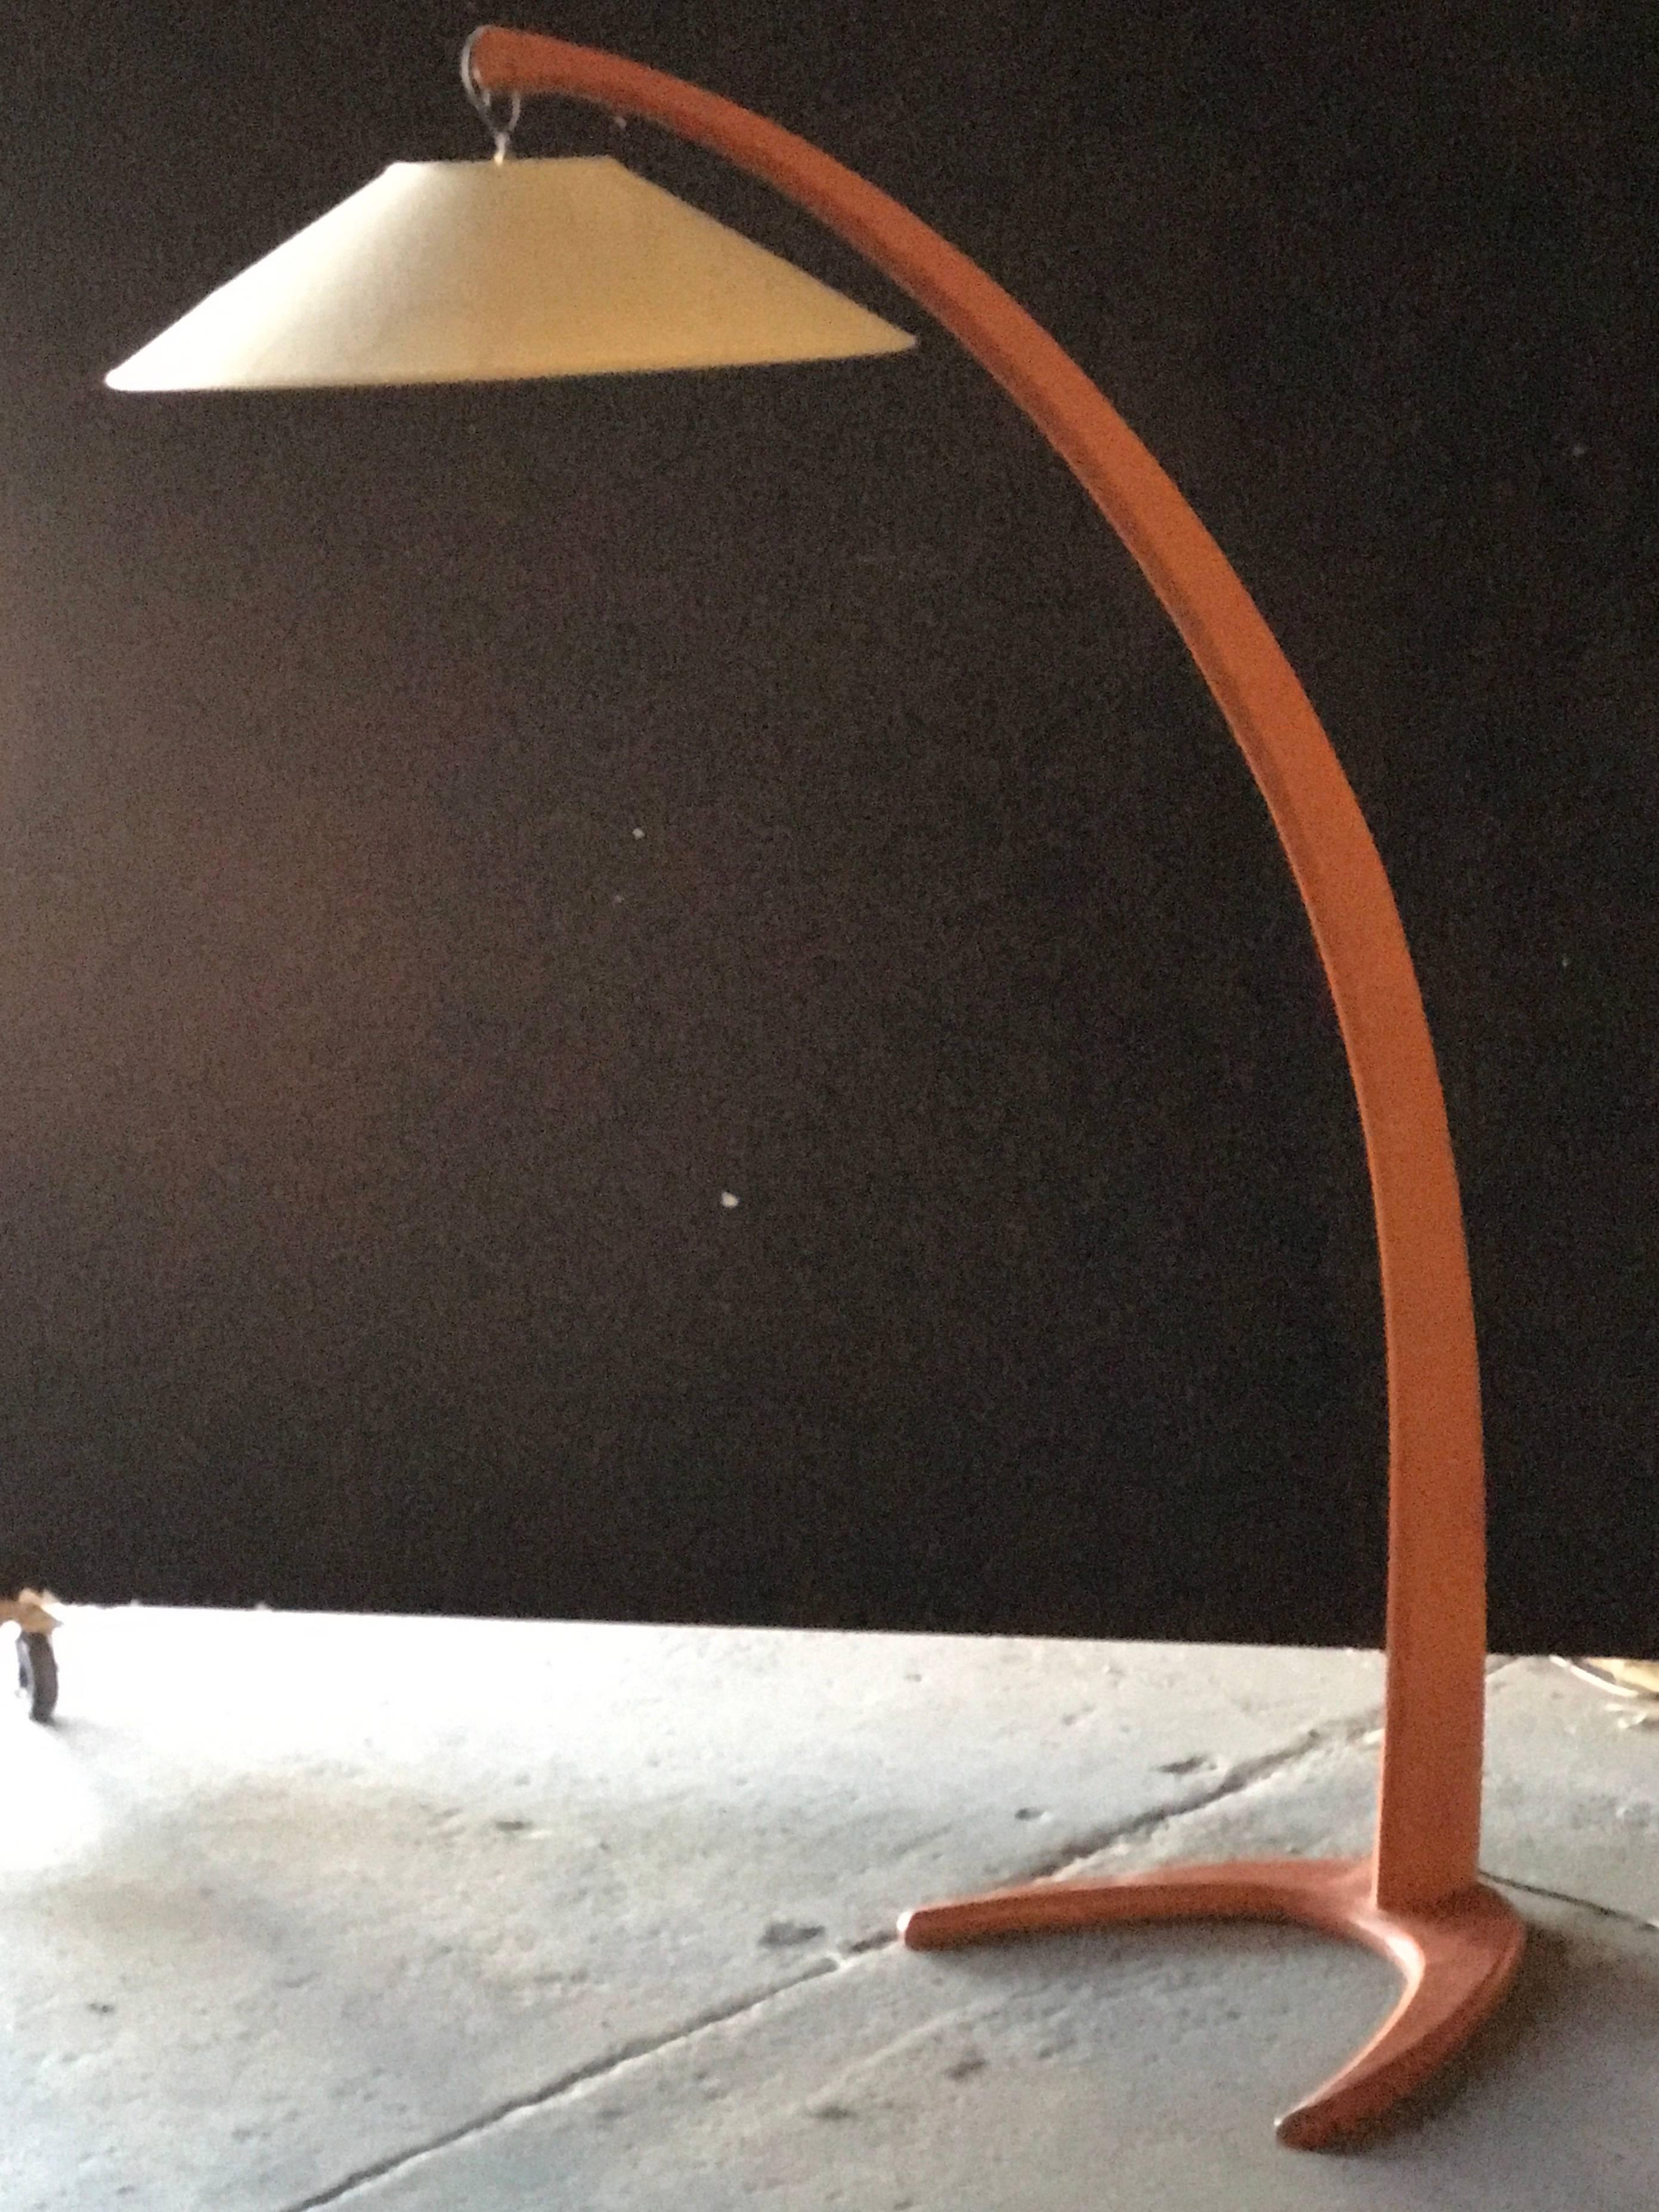 Italian 1950s wood arc floor light. The wood does all the work in this unusual 1950s fine fixture.